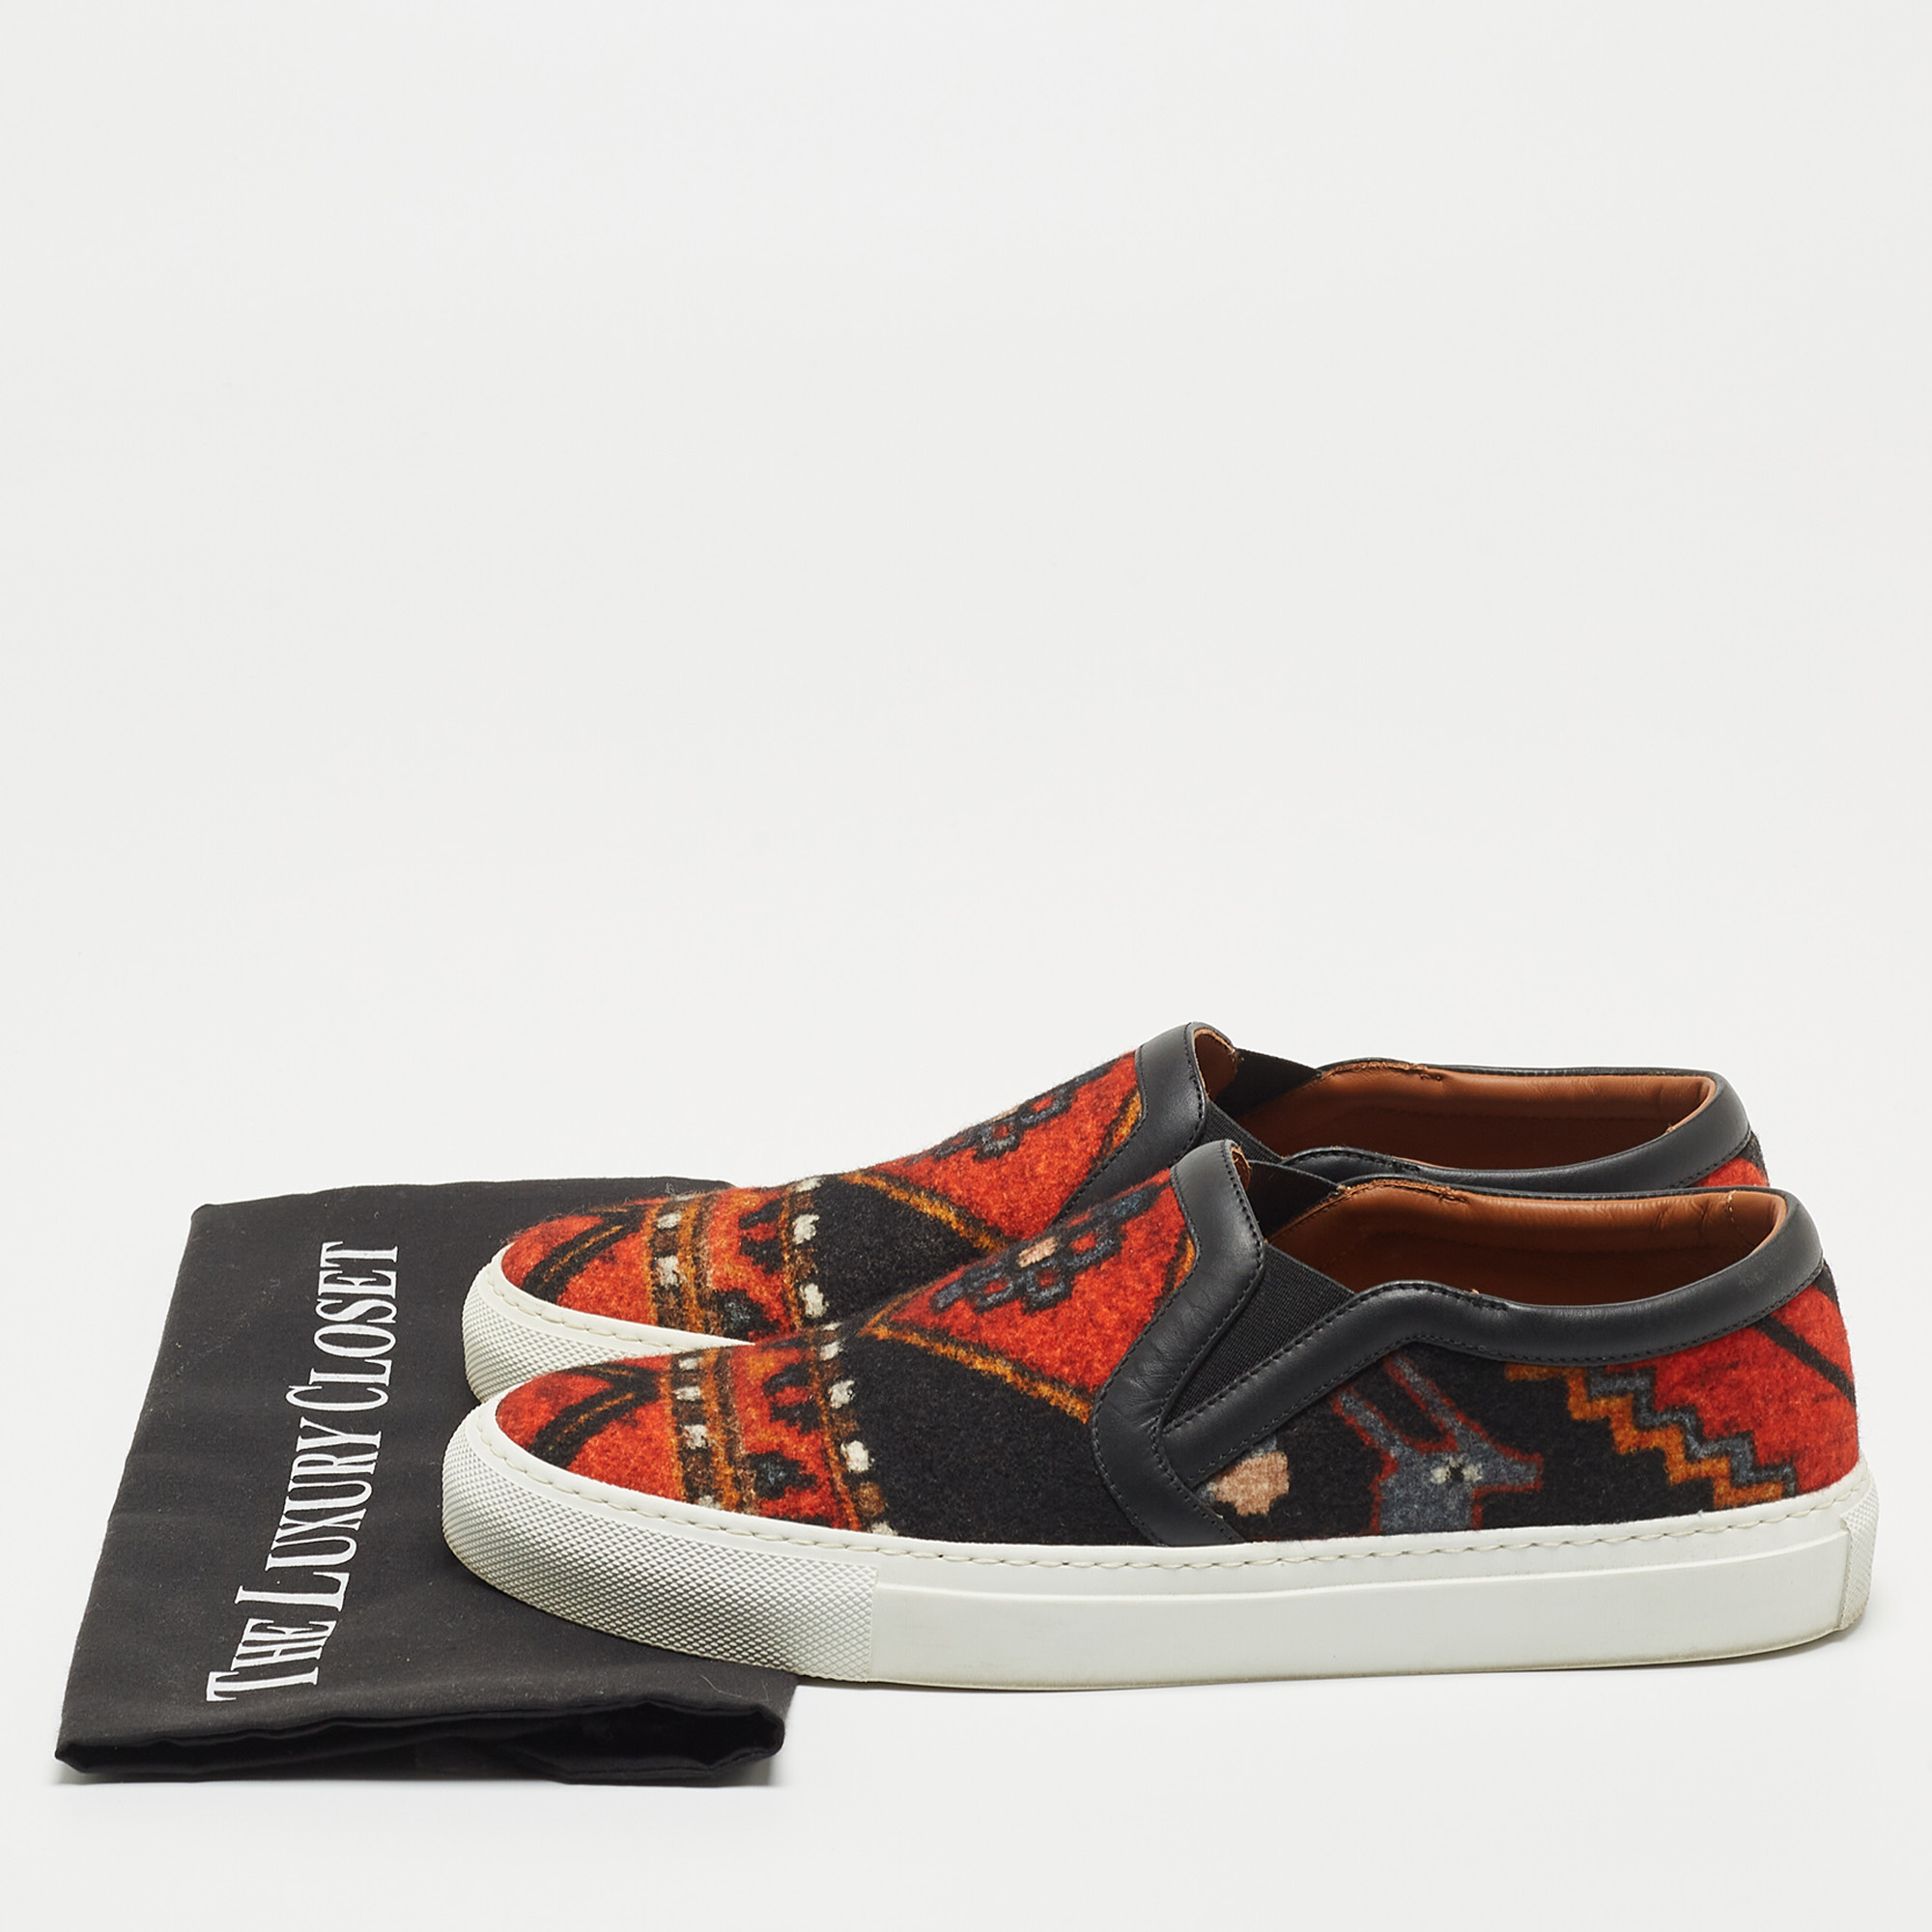 Givenchy Black/Orange Printed Felt And Leather Skate Sneakers Size 40